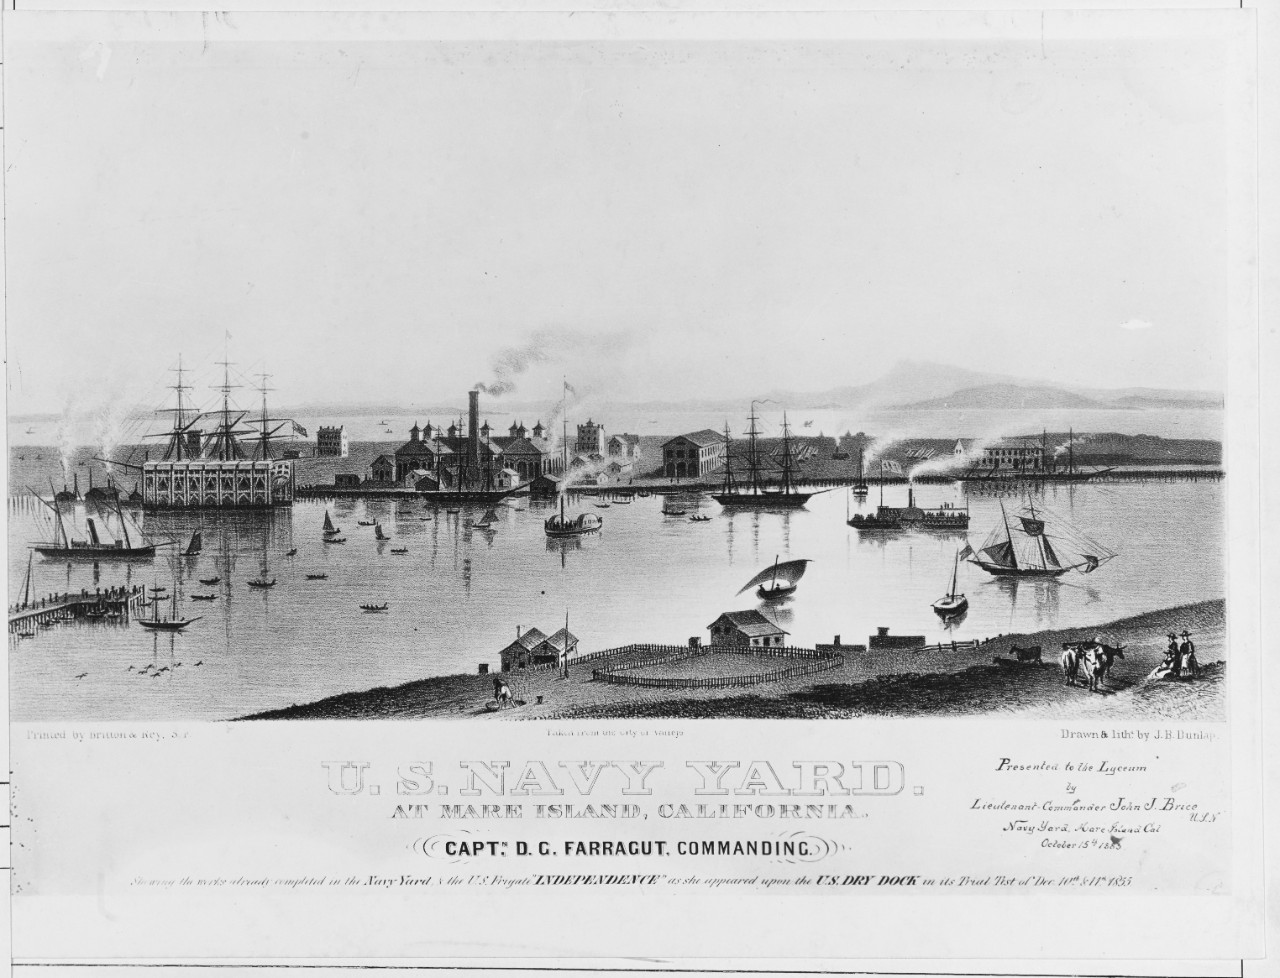 U.S. frigate INDEPENDENCE in dry dock at Mare Island Navy Yard, 1855.